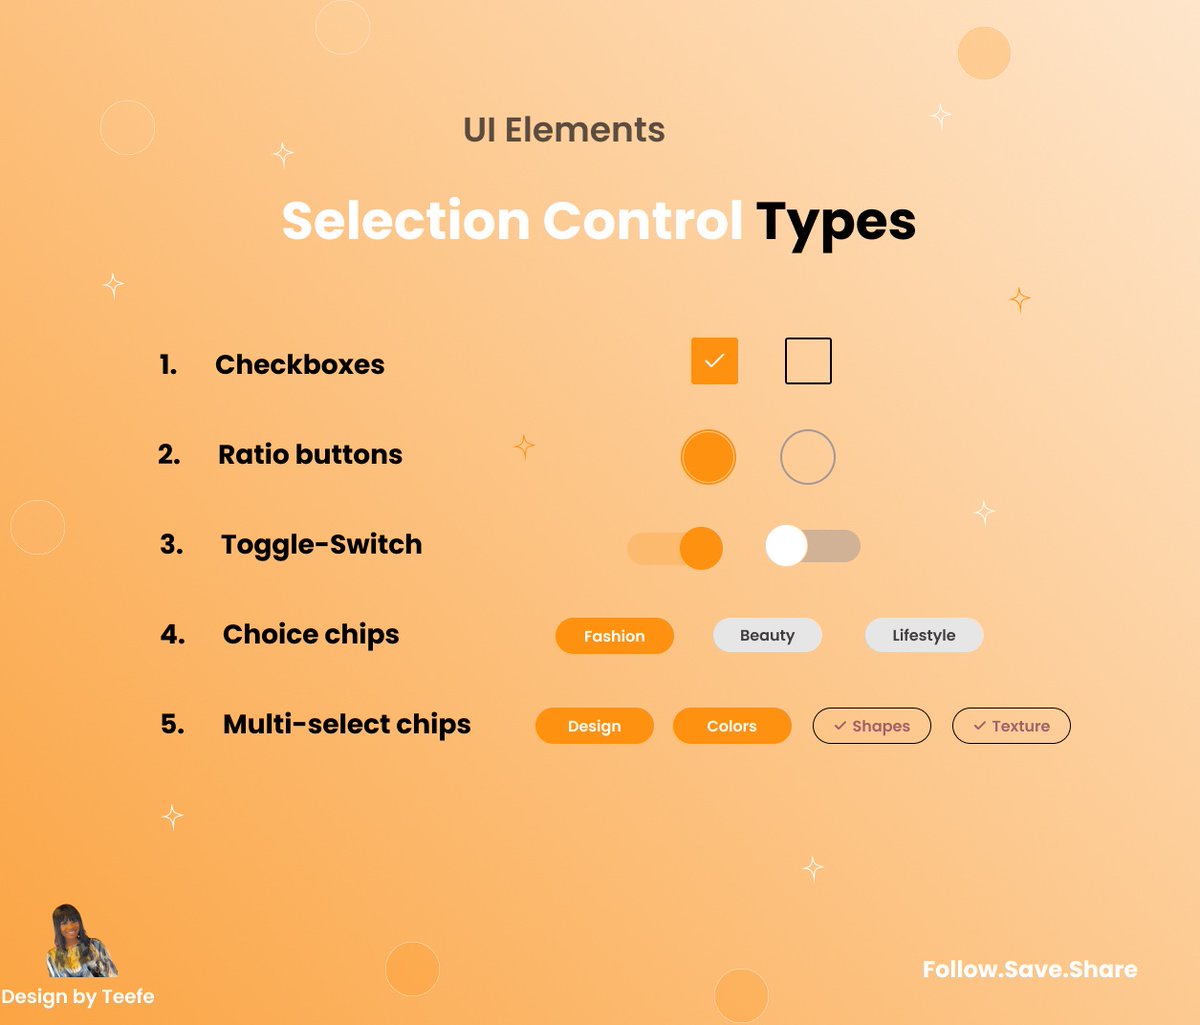 Hello Everyone 👋

Let's talk about control selection buttons today.

📍checkboxes
📍 Ratio buttons 
📍Toggle- Switch
📍Choice- Chips
📍Multiple- Select chips

#Dailytipswithteefe @uxui_daily
#ui #uitips #uxtips #uxui #designtips #designer #uxdesigner